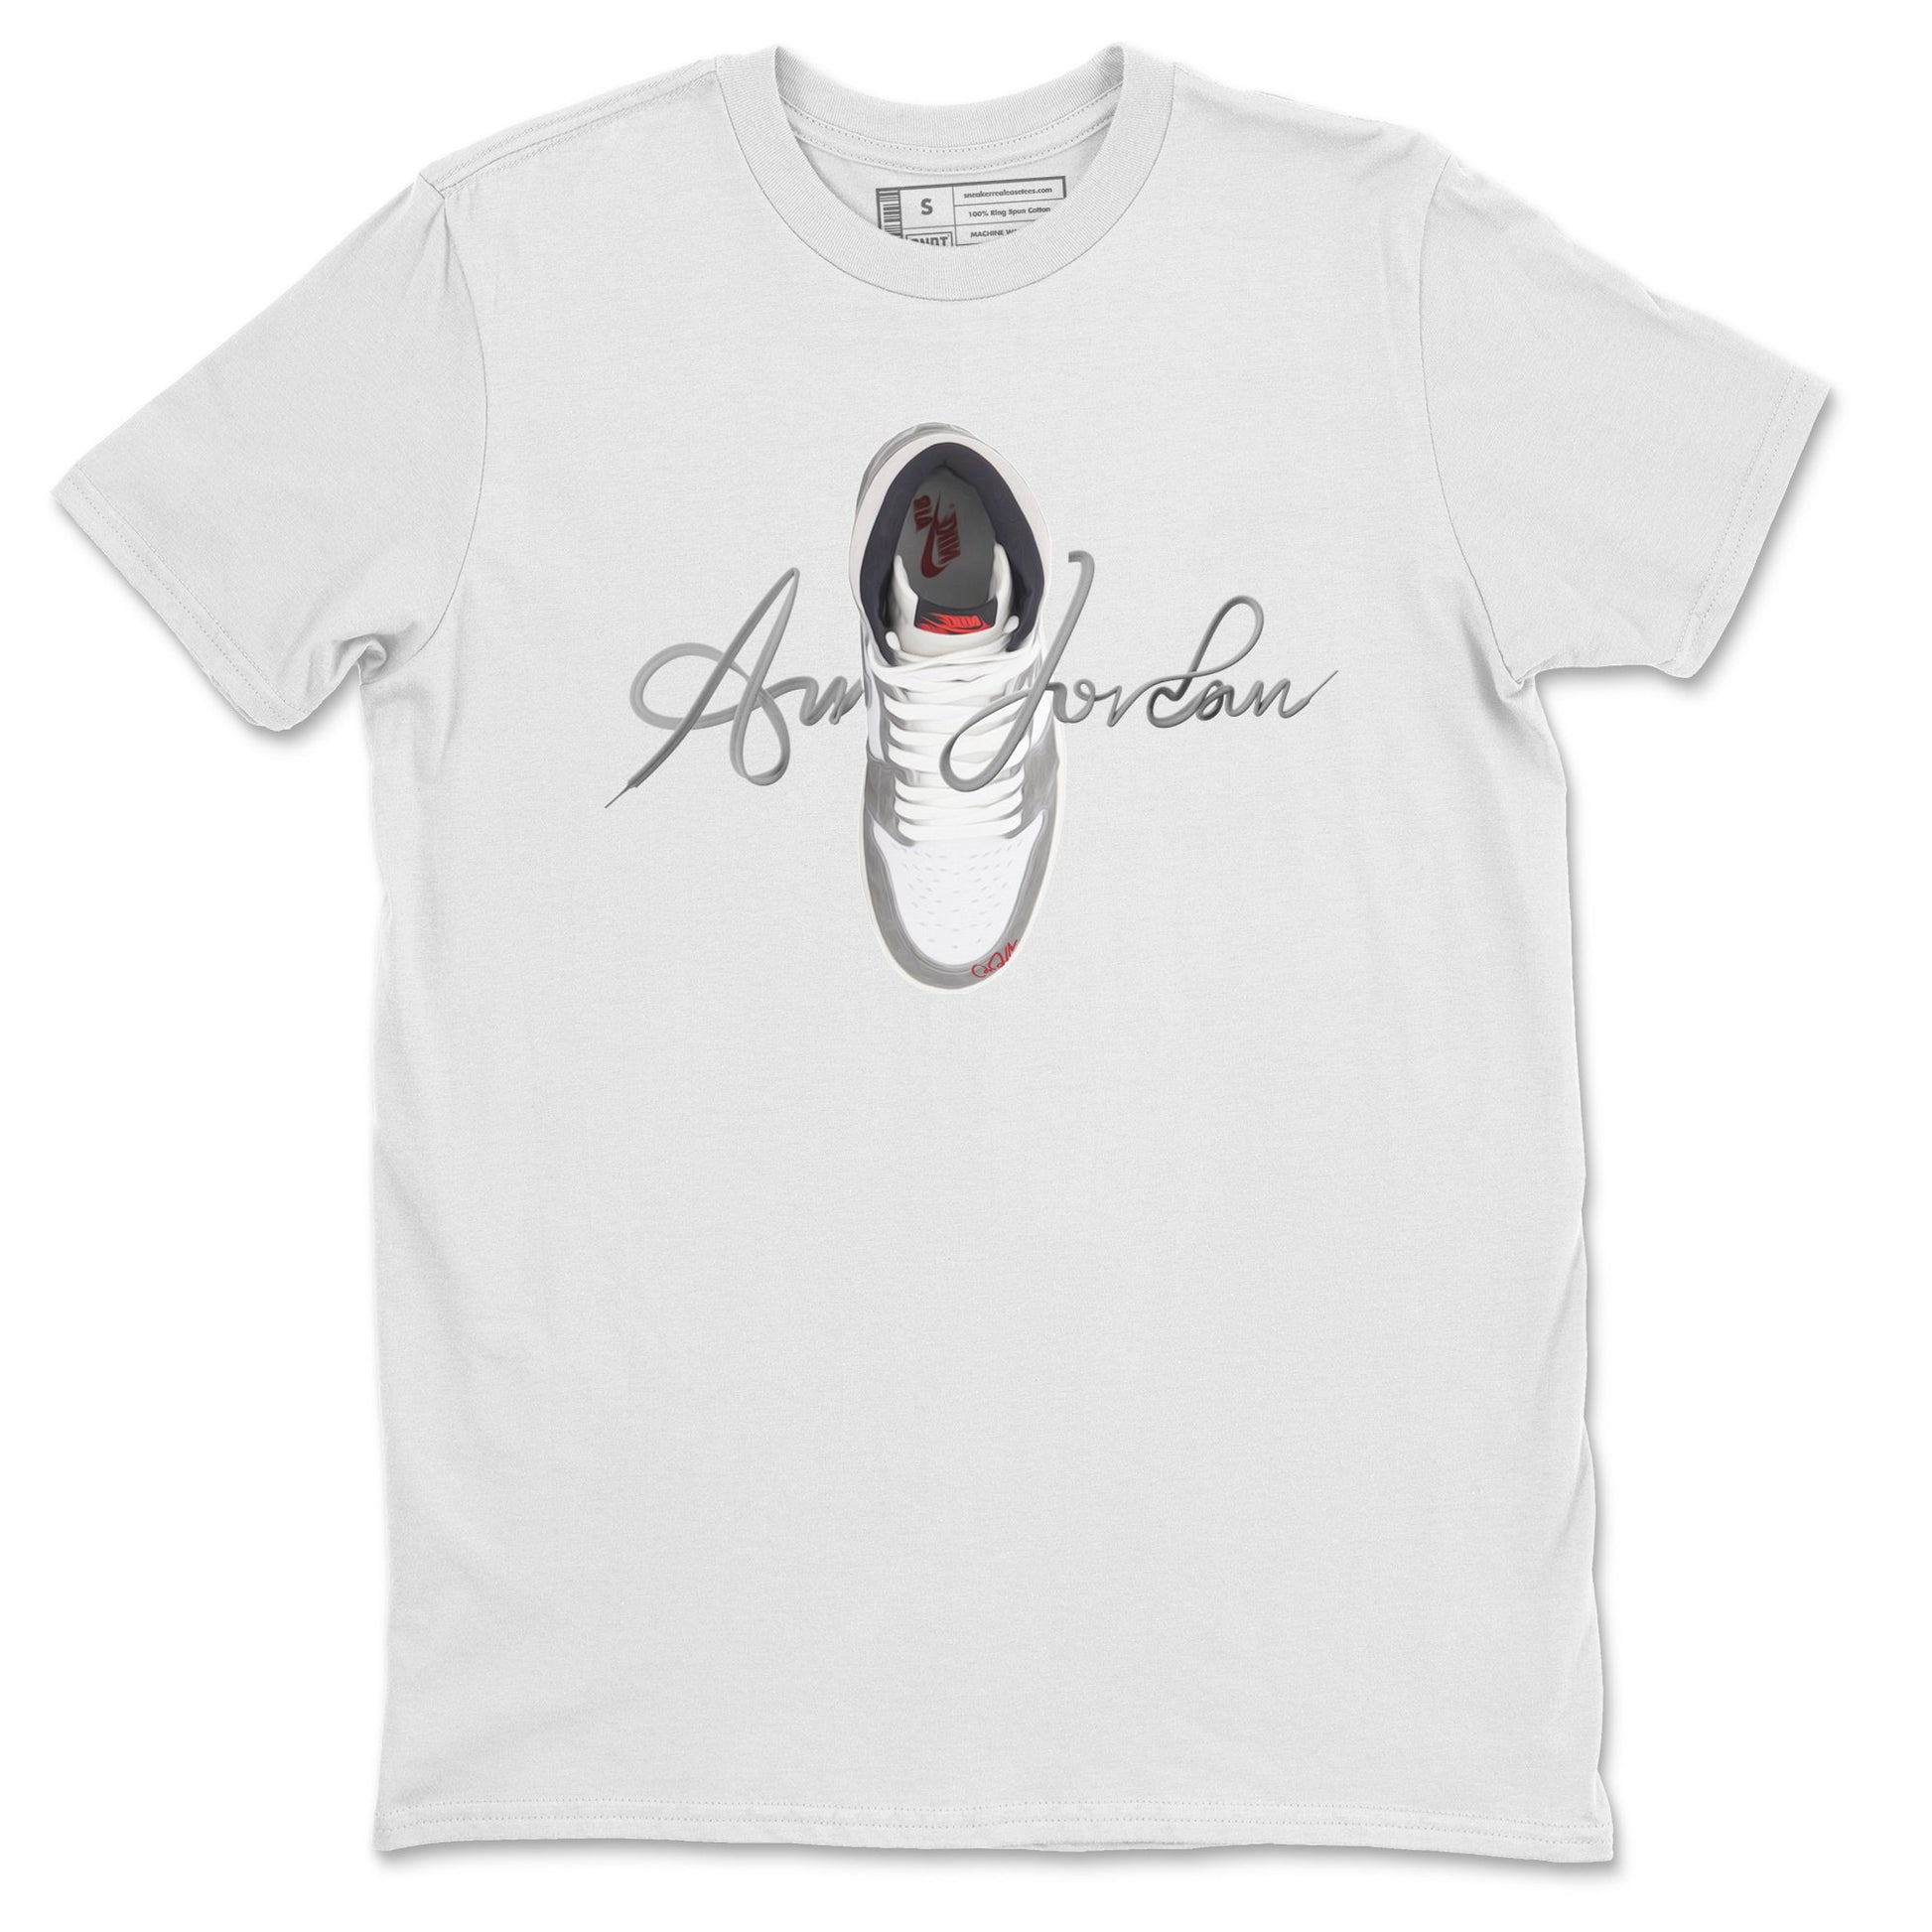 Air Jordan 1 Washed Heritage Sneaker Match Tees Caligraphy Shoe Lace Shirts AJ1 Washed Heritage Drip Gear Zone Unisex Shirts White 2